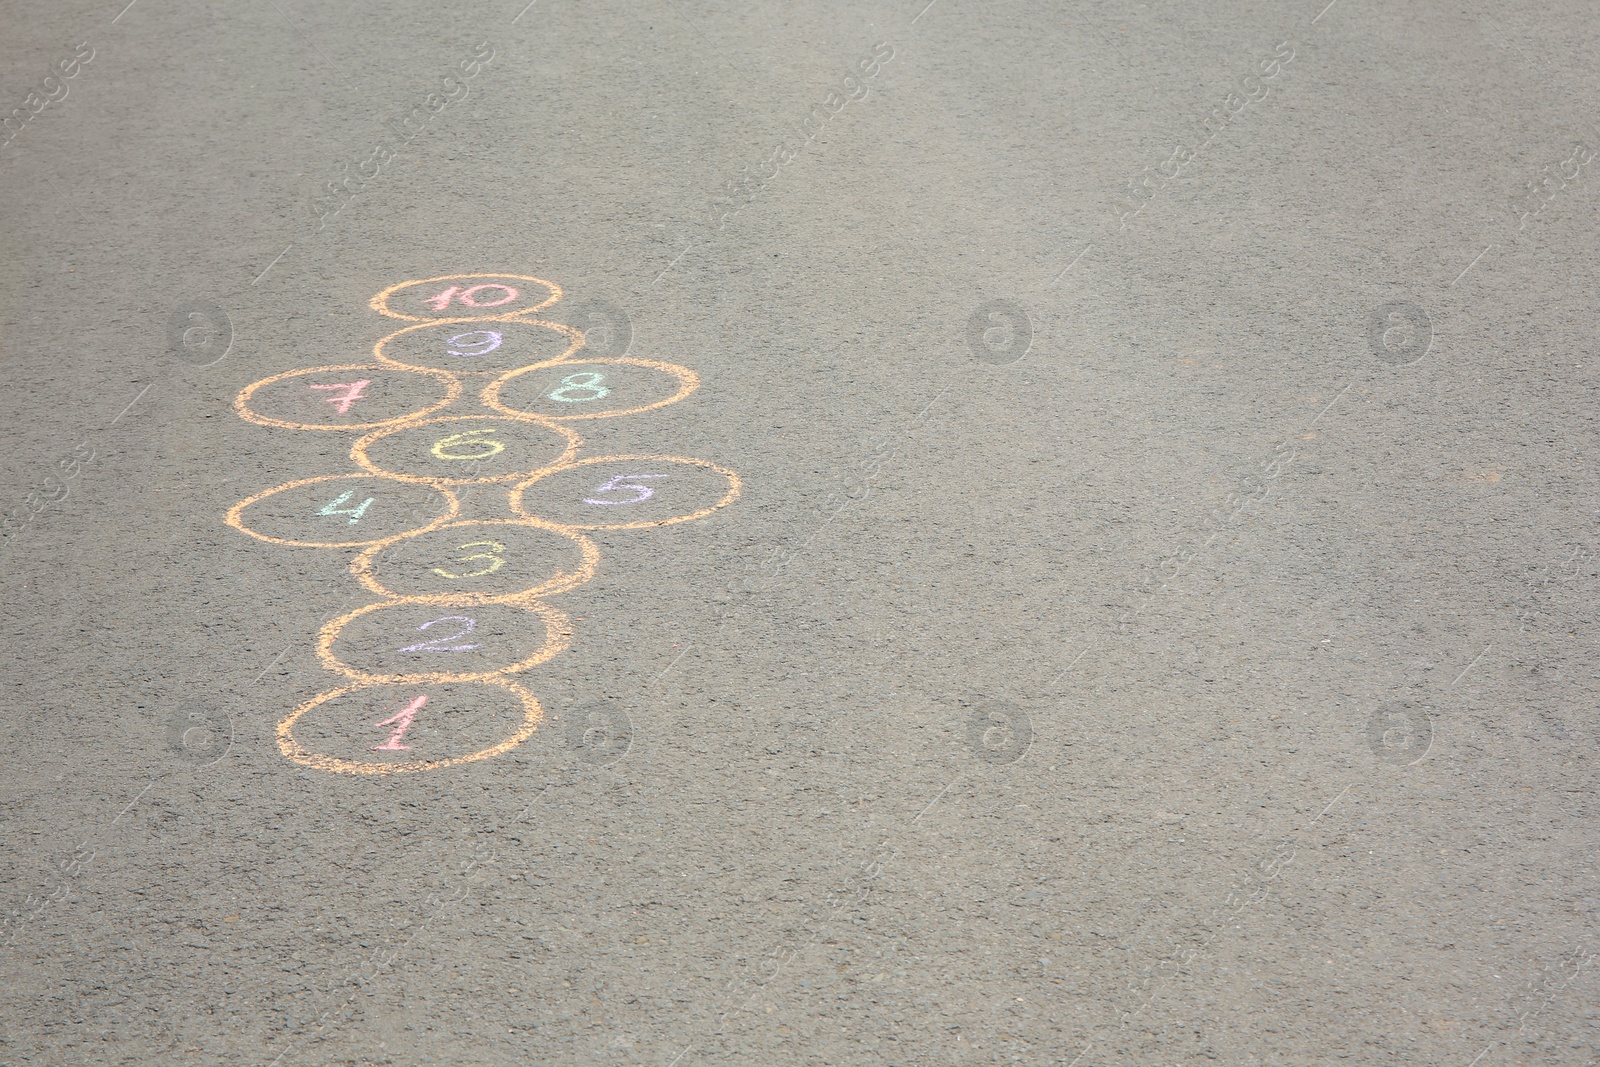 Photo of Hopscotch drawn with colorful chalk on asphalt outdoors, space for text